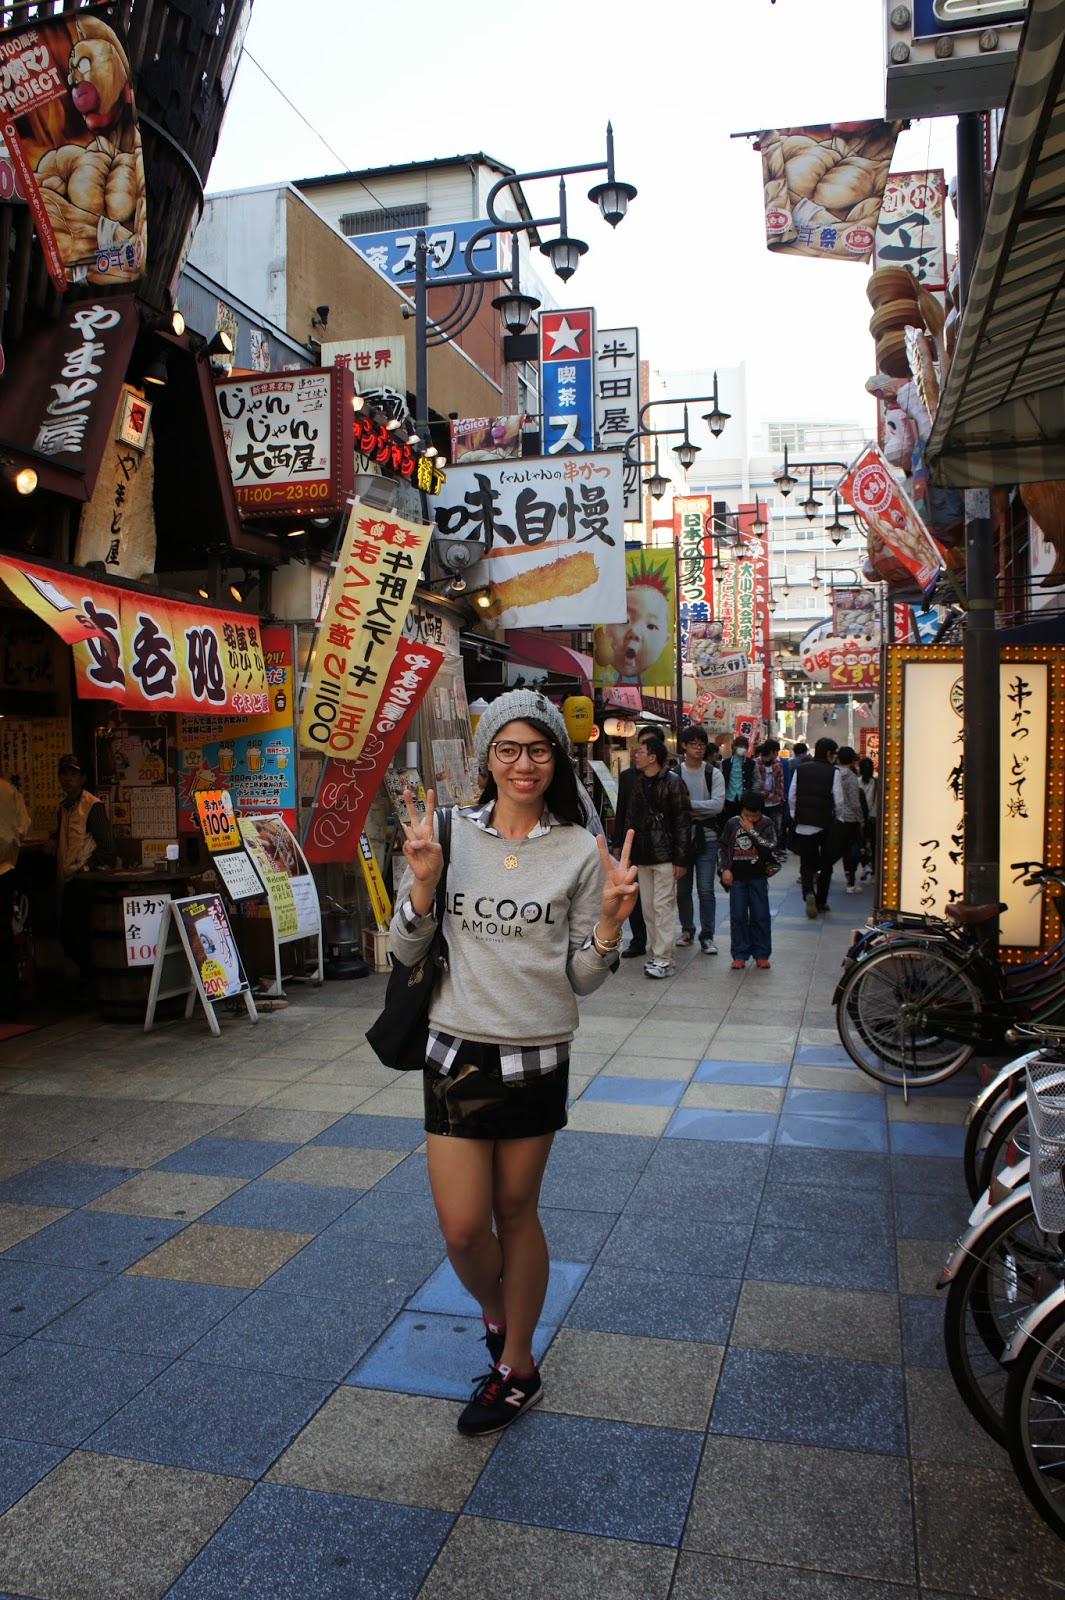  Where  find  a prostitutes in Osaka, Japan